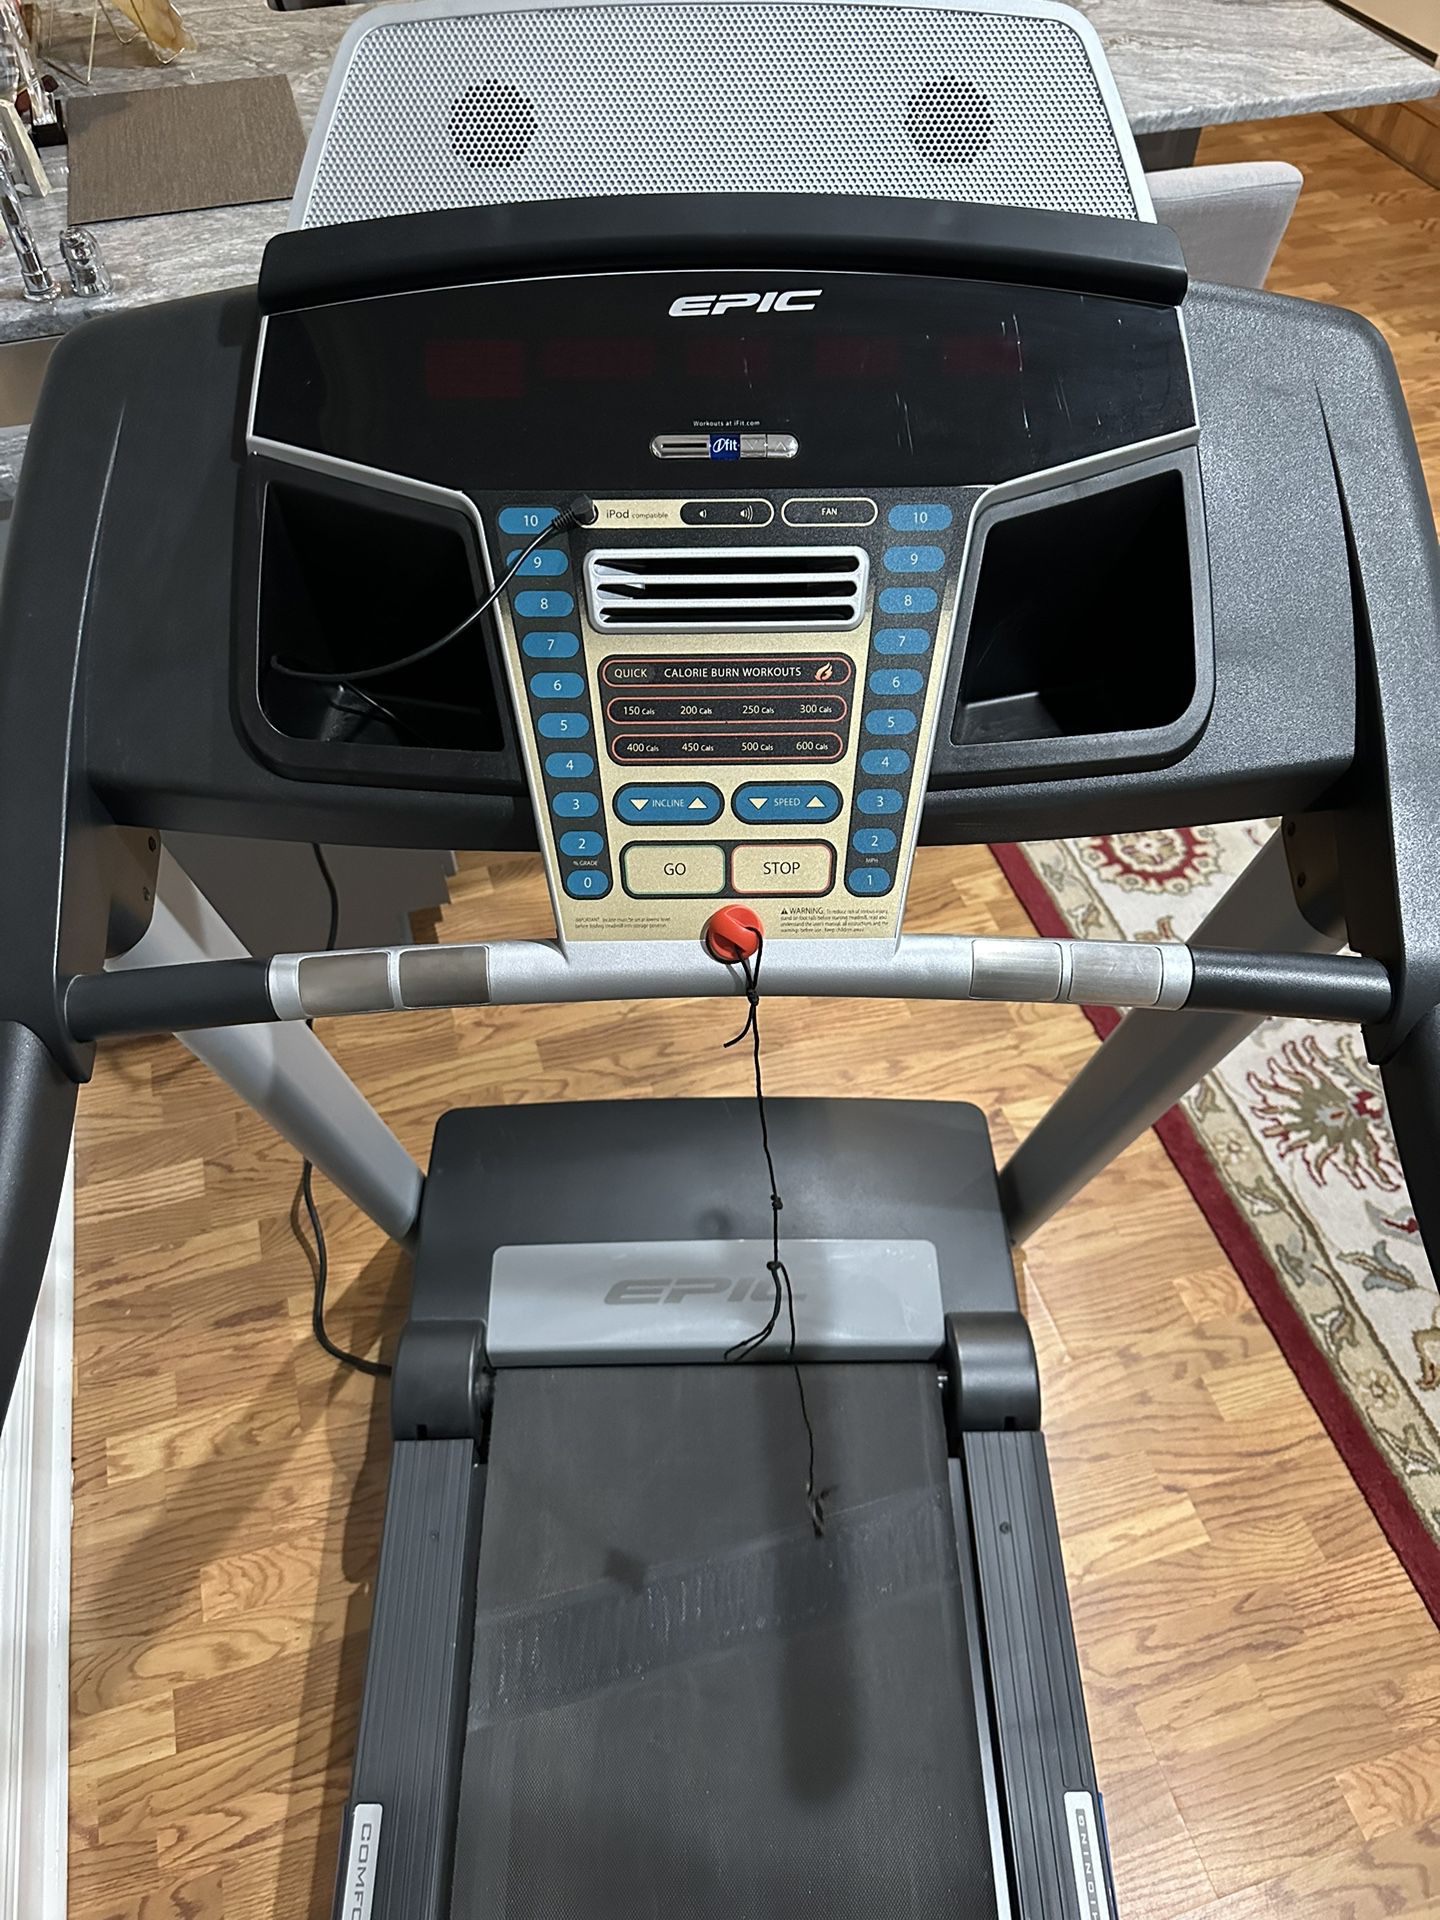 Treadmill By EPIC